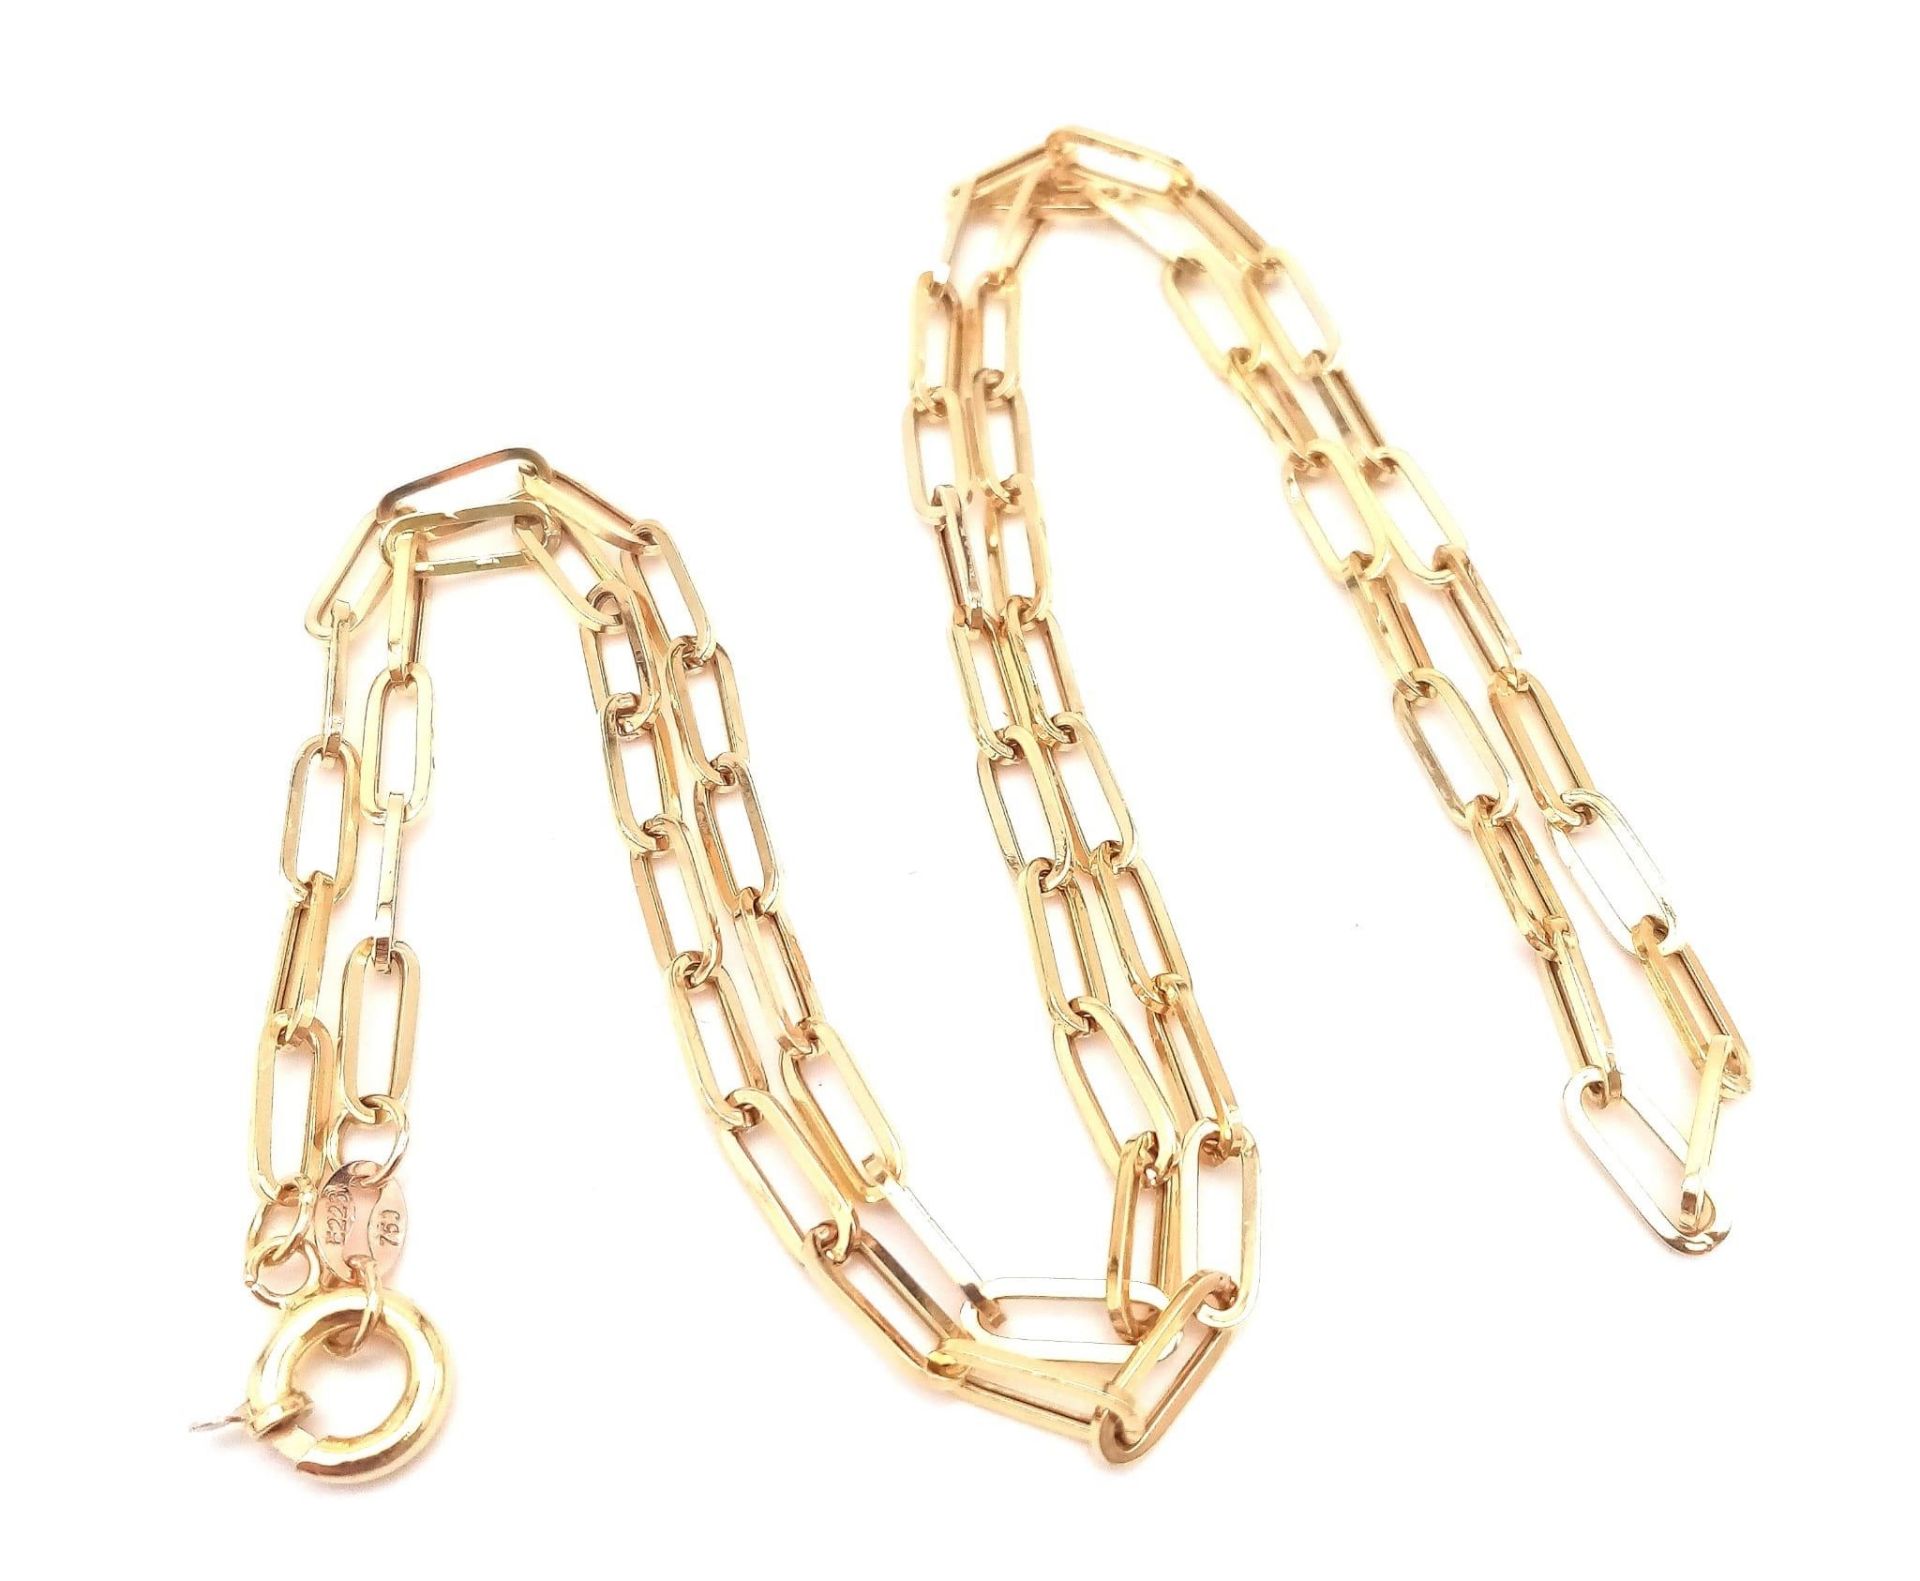 An 18K Yellow Gold Elongated Link Chain. 56cm length. 5.5g weight. - Image 6 of 9